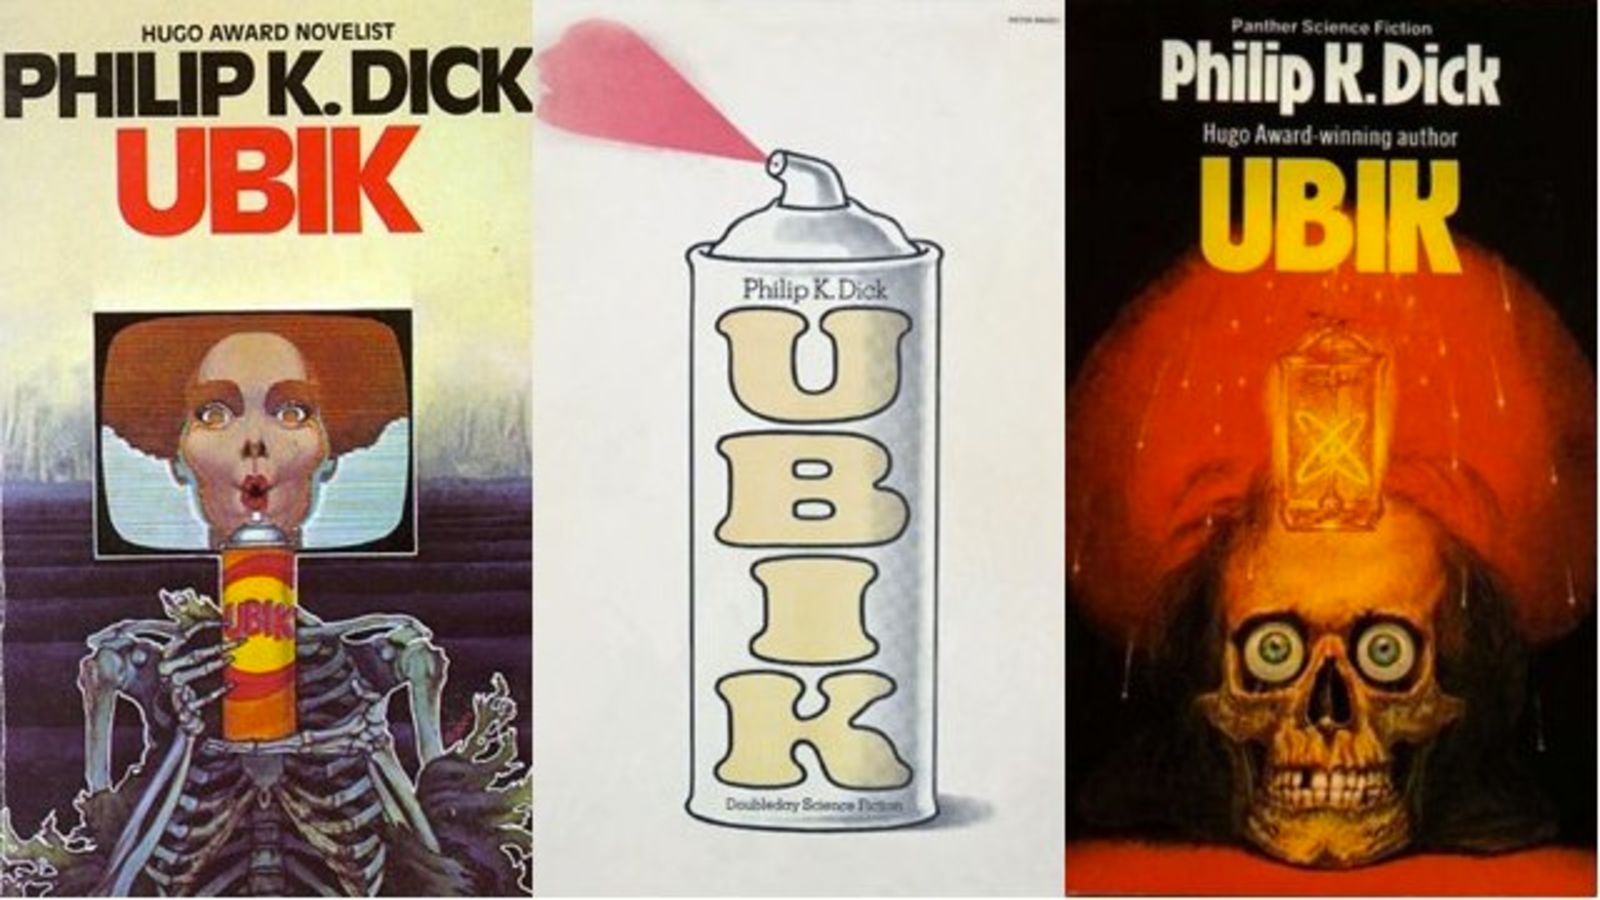 Philip dick stories that criticism of society